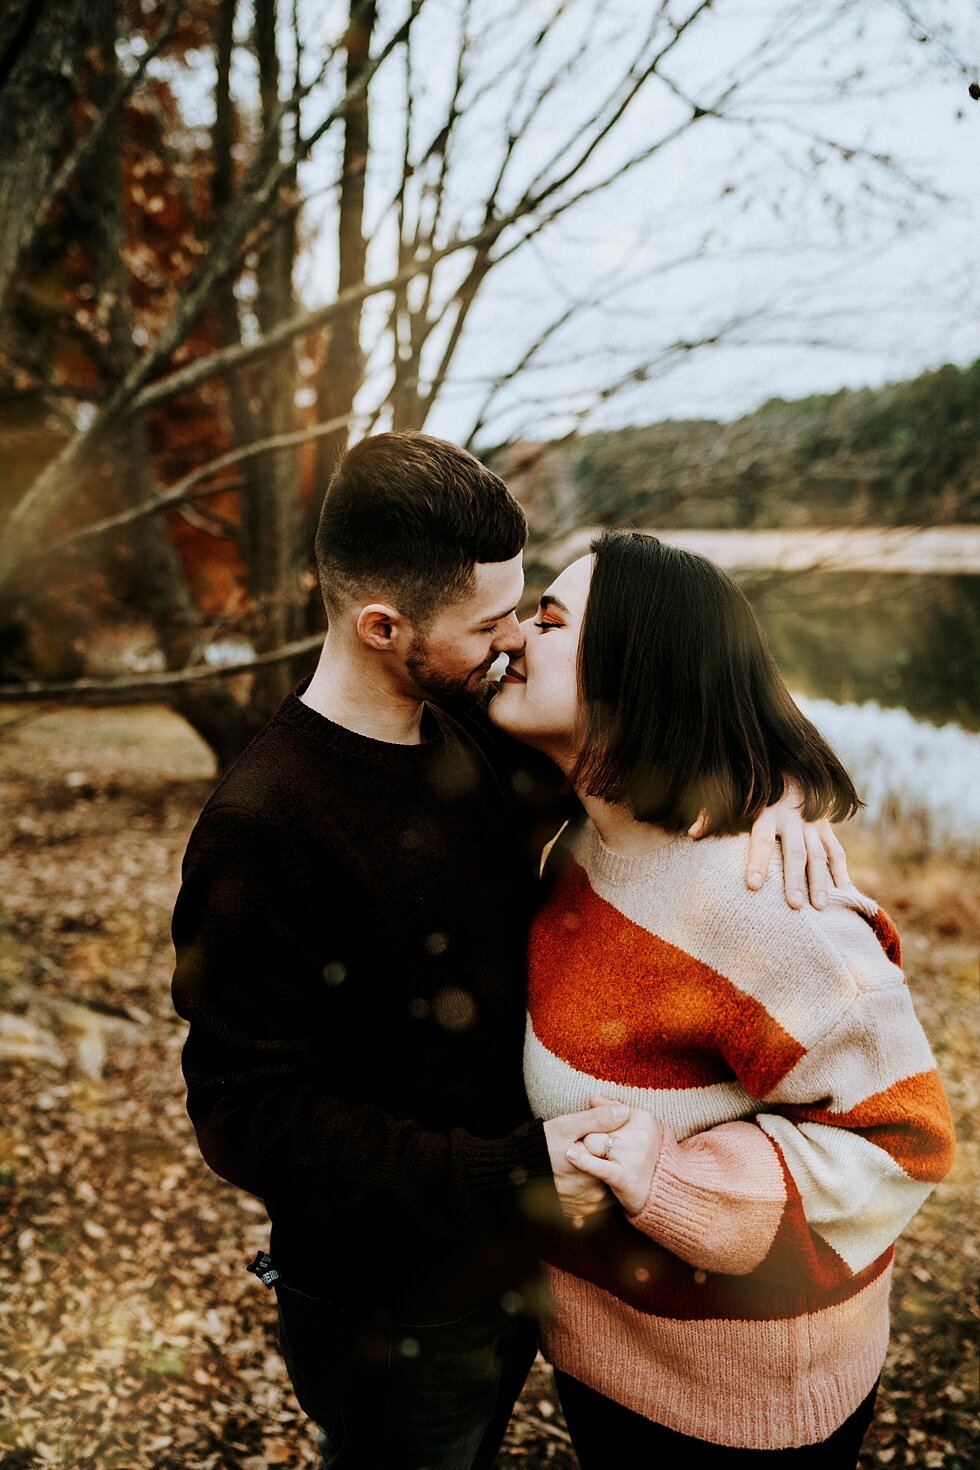  Just moments before sharing a kiss, this engaged couple plays through the forest! #engagementgoals #engagementphotographer #engaged #outdoorengagement #kentuckyphotographer #indianaphotographer #louisvillephotographer #engagementphotos #savethedatep